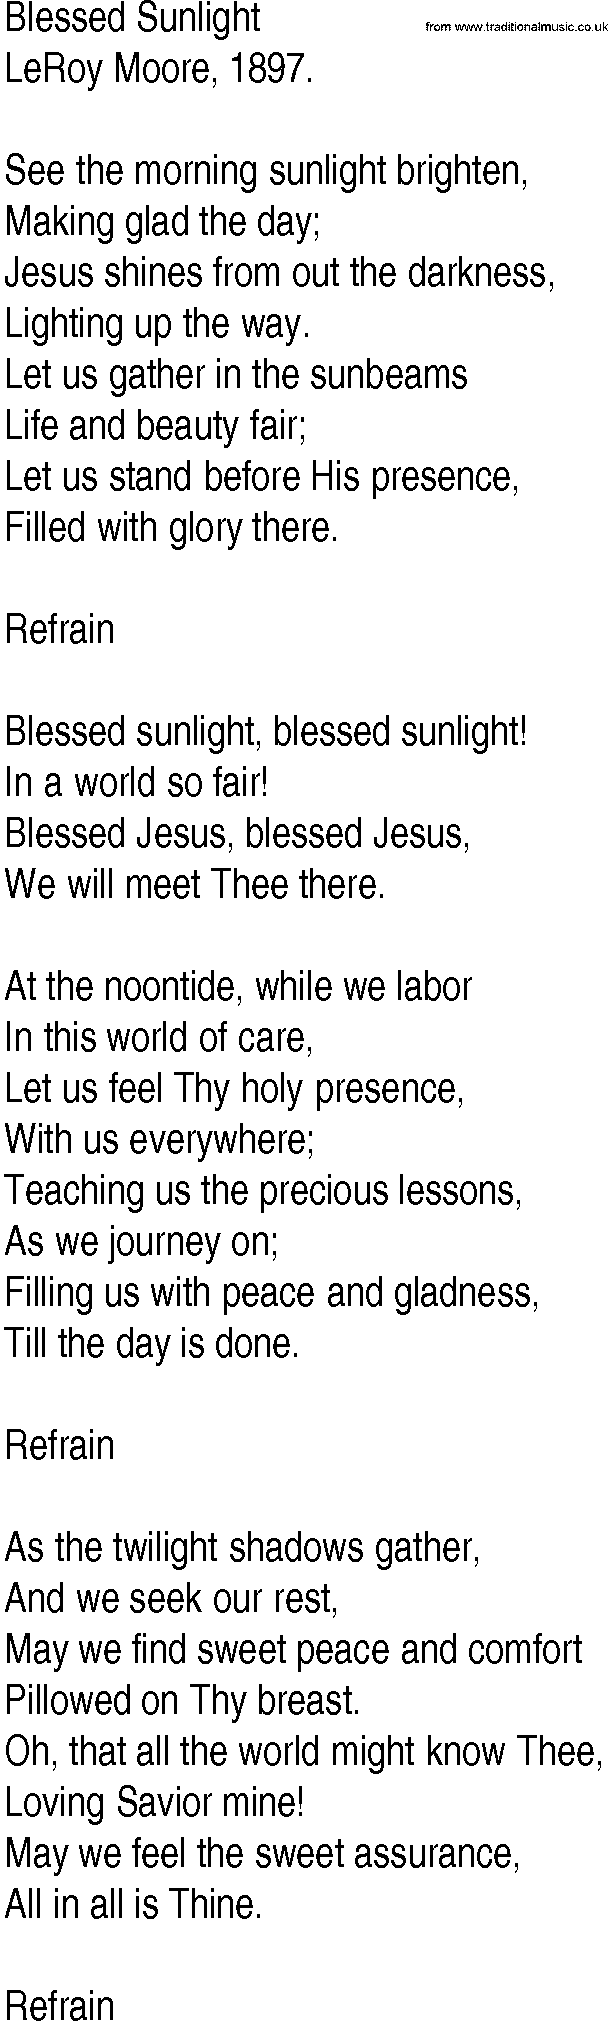 Hymn and Gospel Song: Blessed Sunlight by LeRoy Moore lyrics